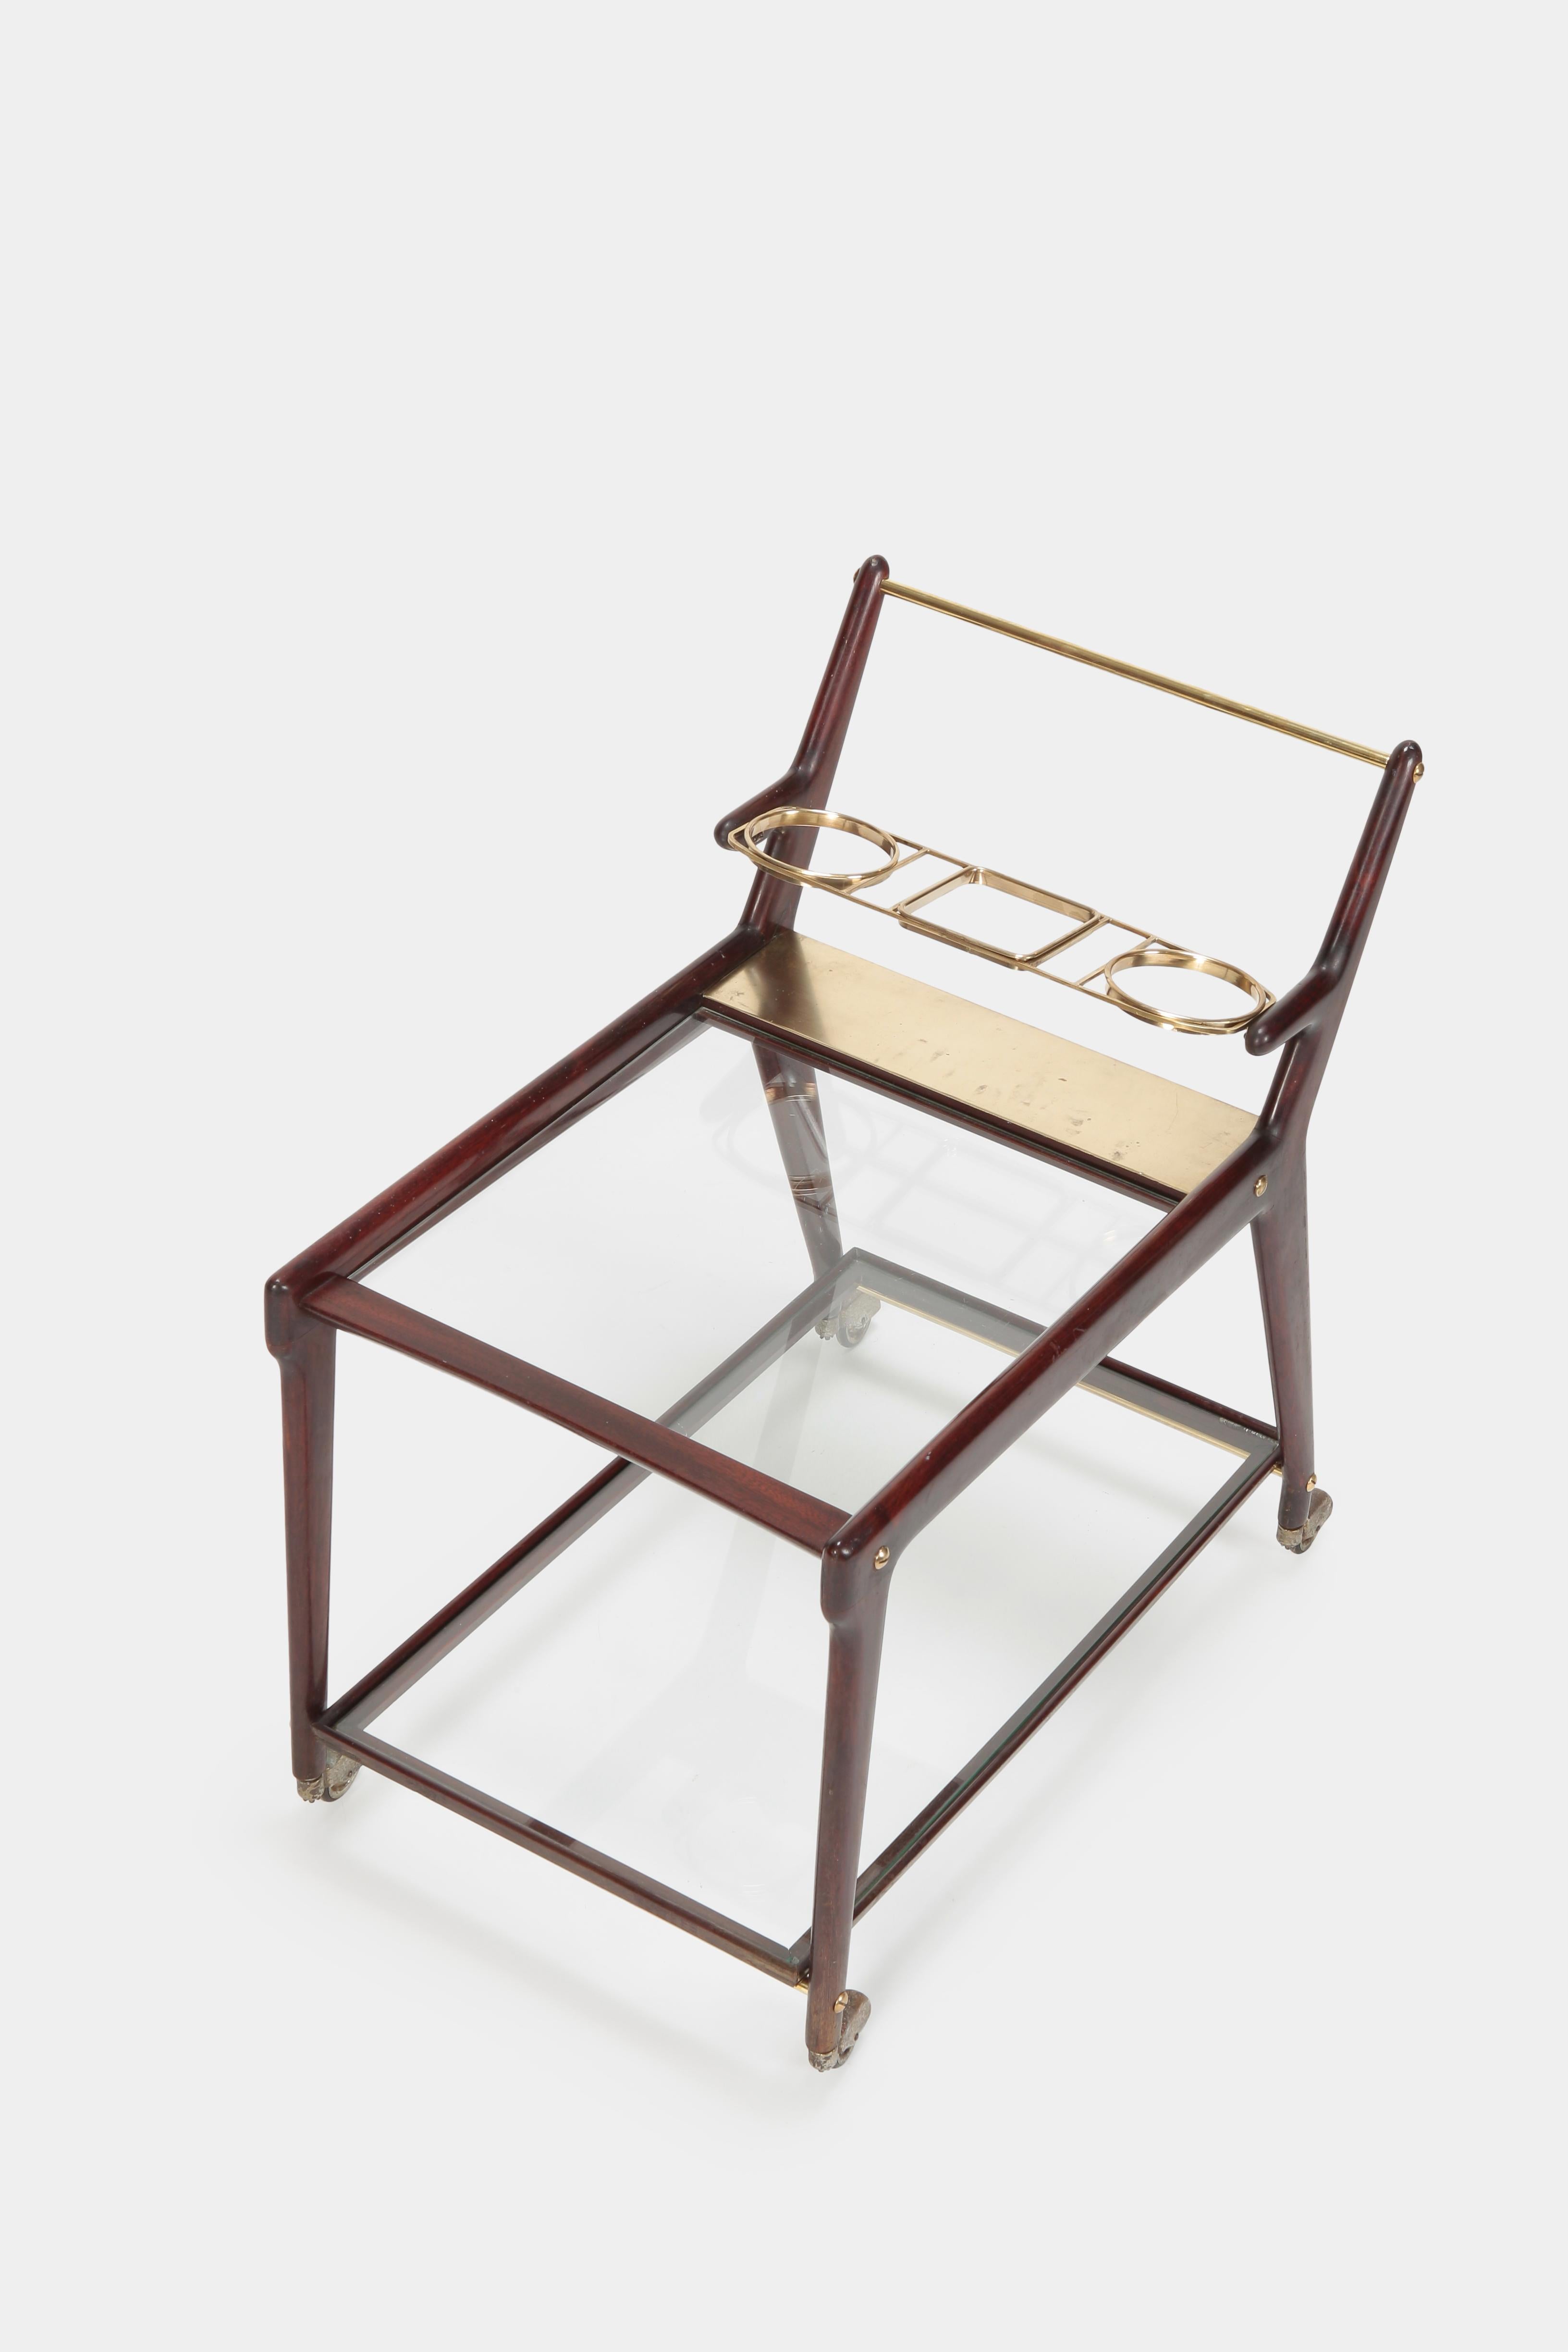 Ico & Luisa Parisi bar cart manufactured in the 1950s in Italy. Elegant shaped frame made of solid mahogany and brass details like the bottle stand and visible screws.